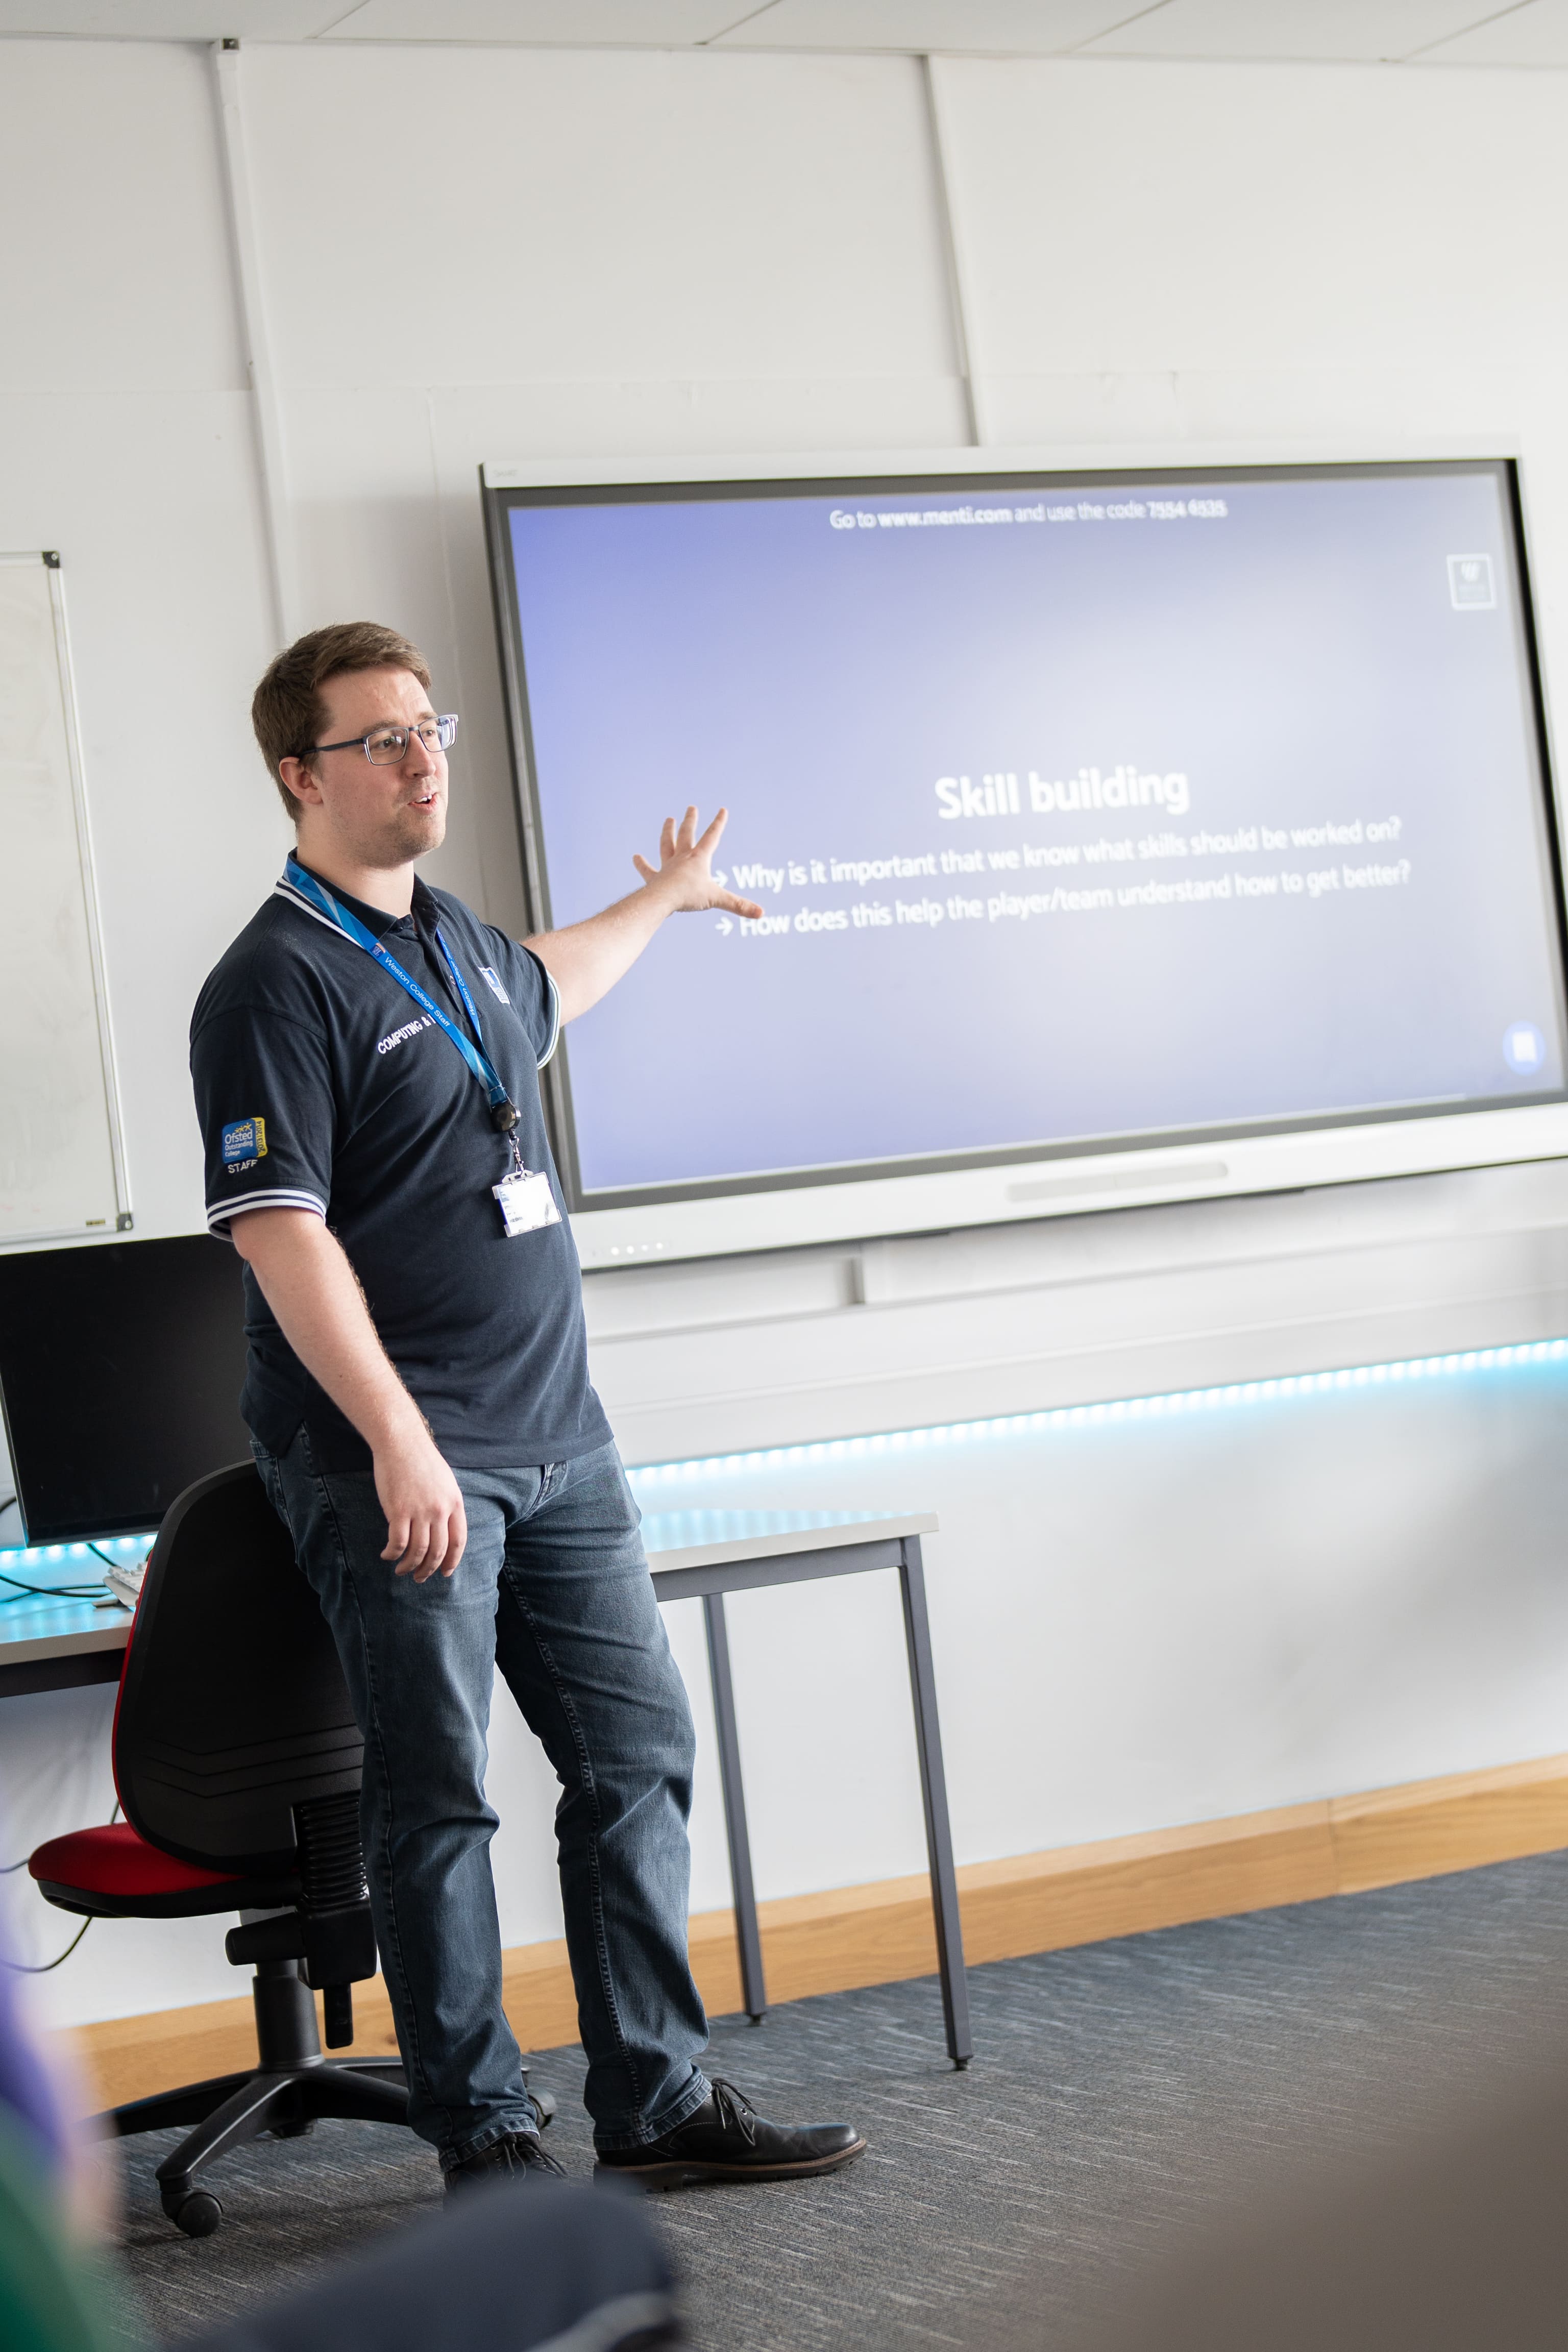 lecturer at the front of a classroom pointing to an interactive whiteboard